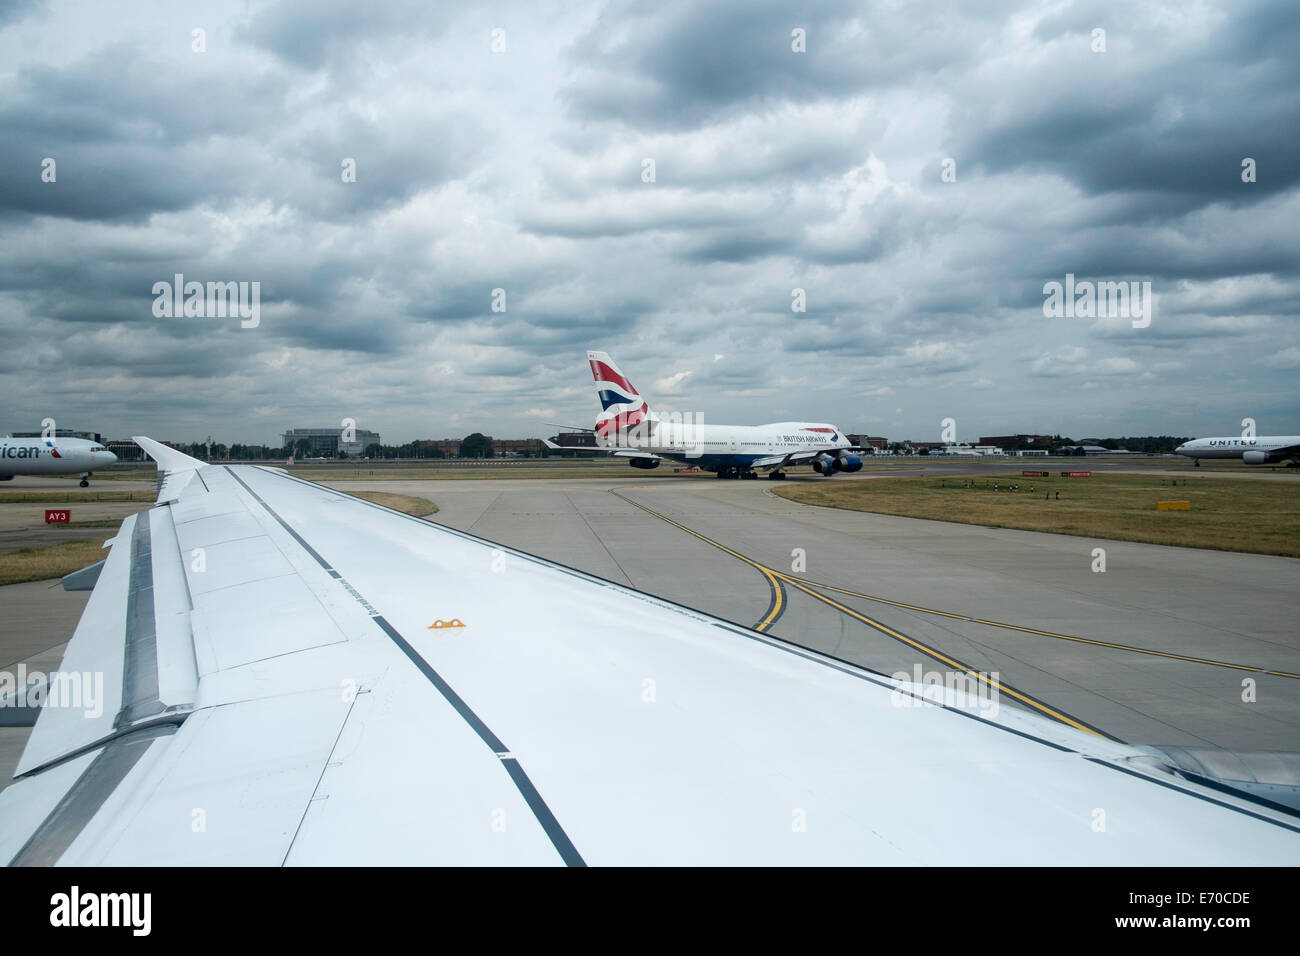 Airplan taxing on a runway, Heathrow Airport, Terminal 1, London, United Kingdom Stock Photo